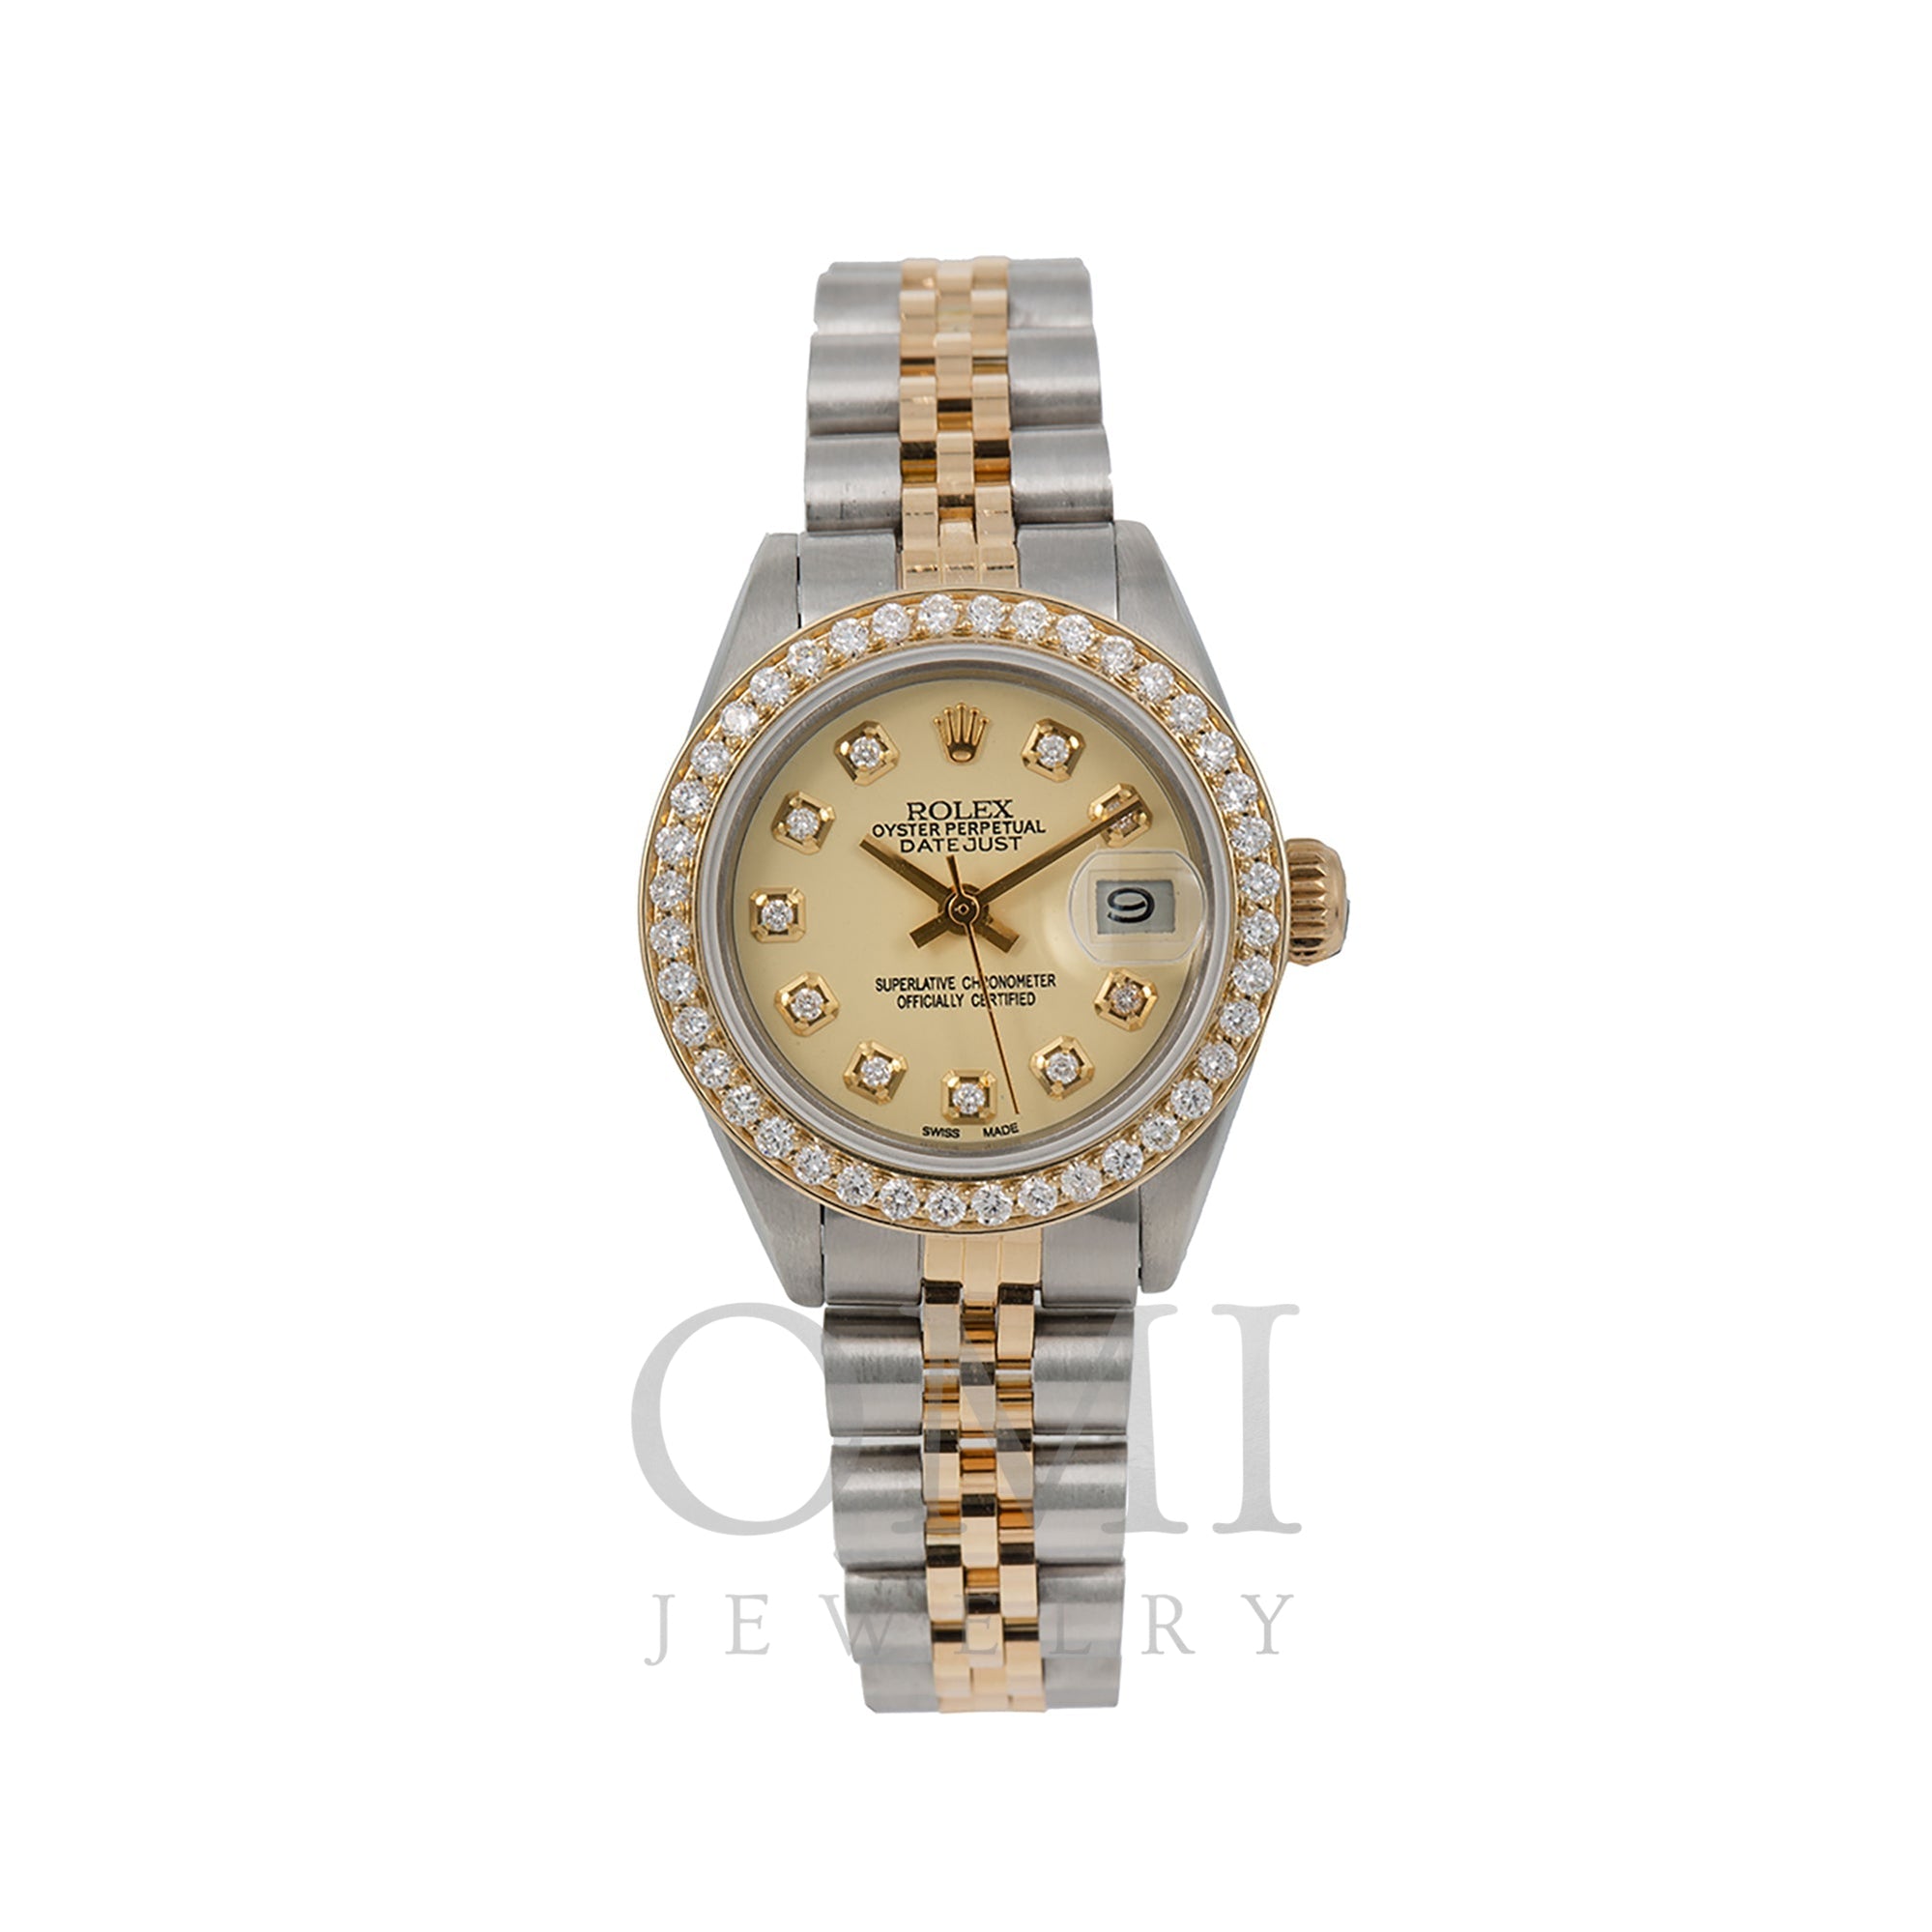 Uplifted undertrykkeren Uoverensstemmelse Rolex Oyster Perpetual Ladies Diamond Watch, DateJust 6916 26mm, Champ -  OMI Jewelry